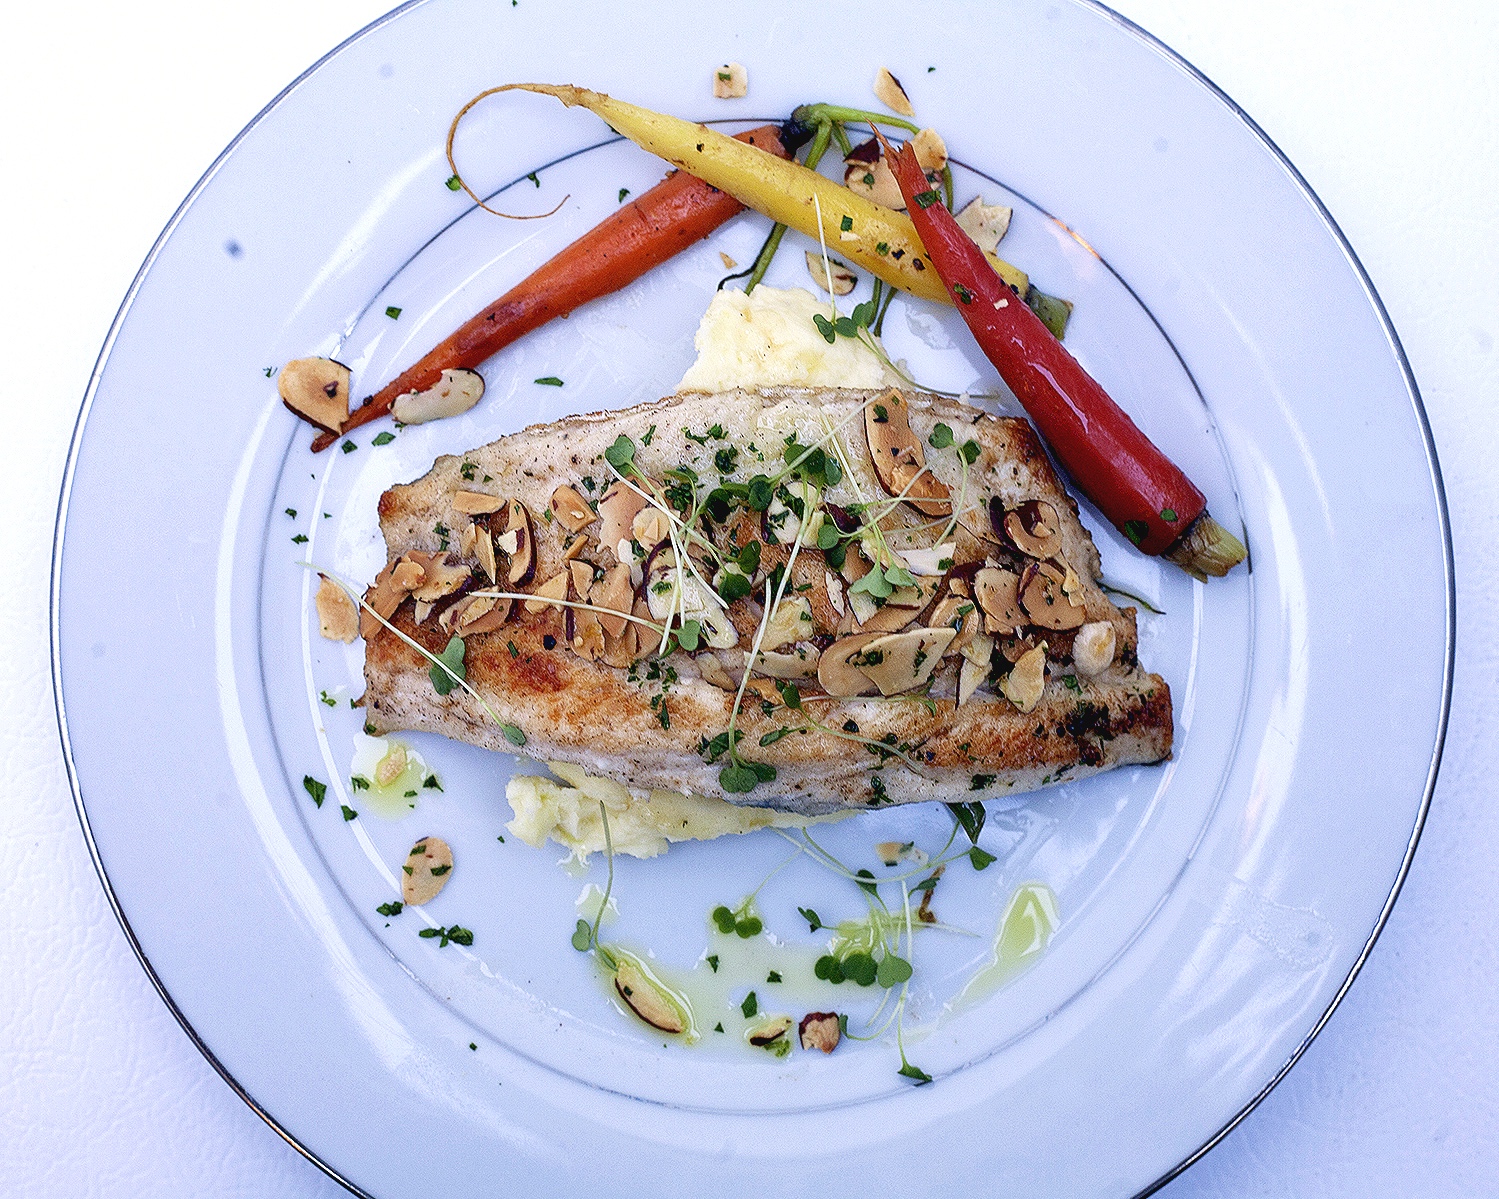 Almond crusted sea bass with roasted heirloom carrots